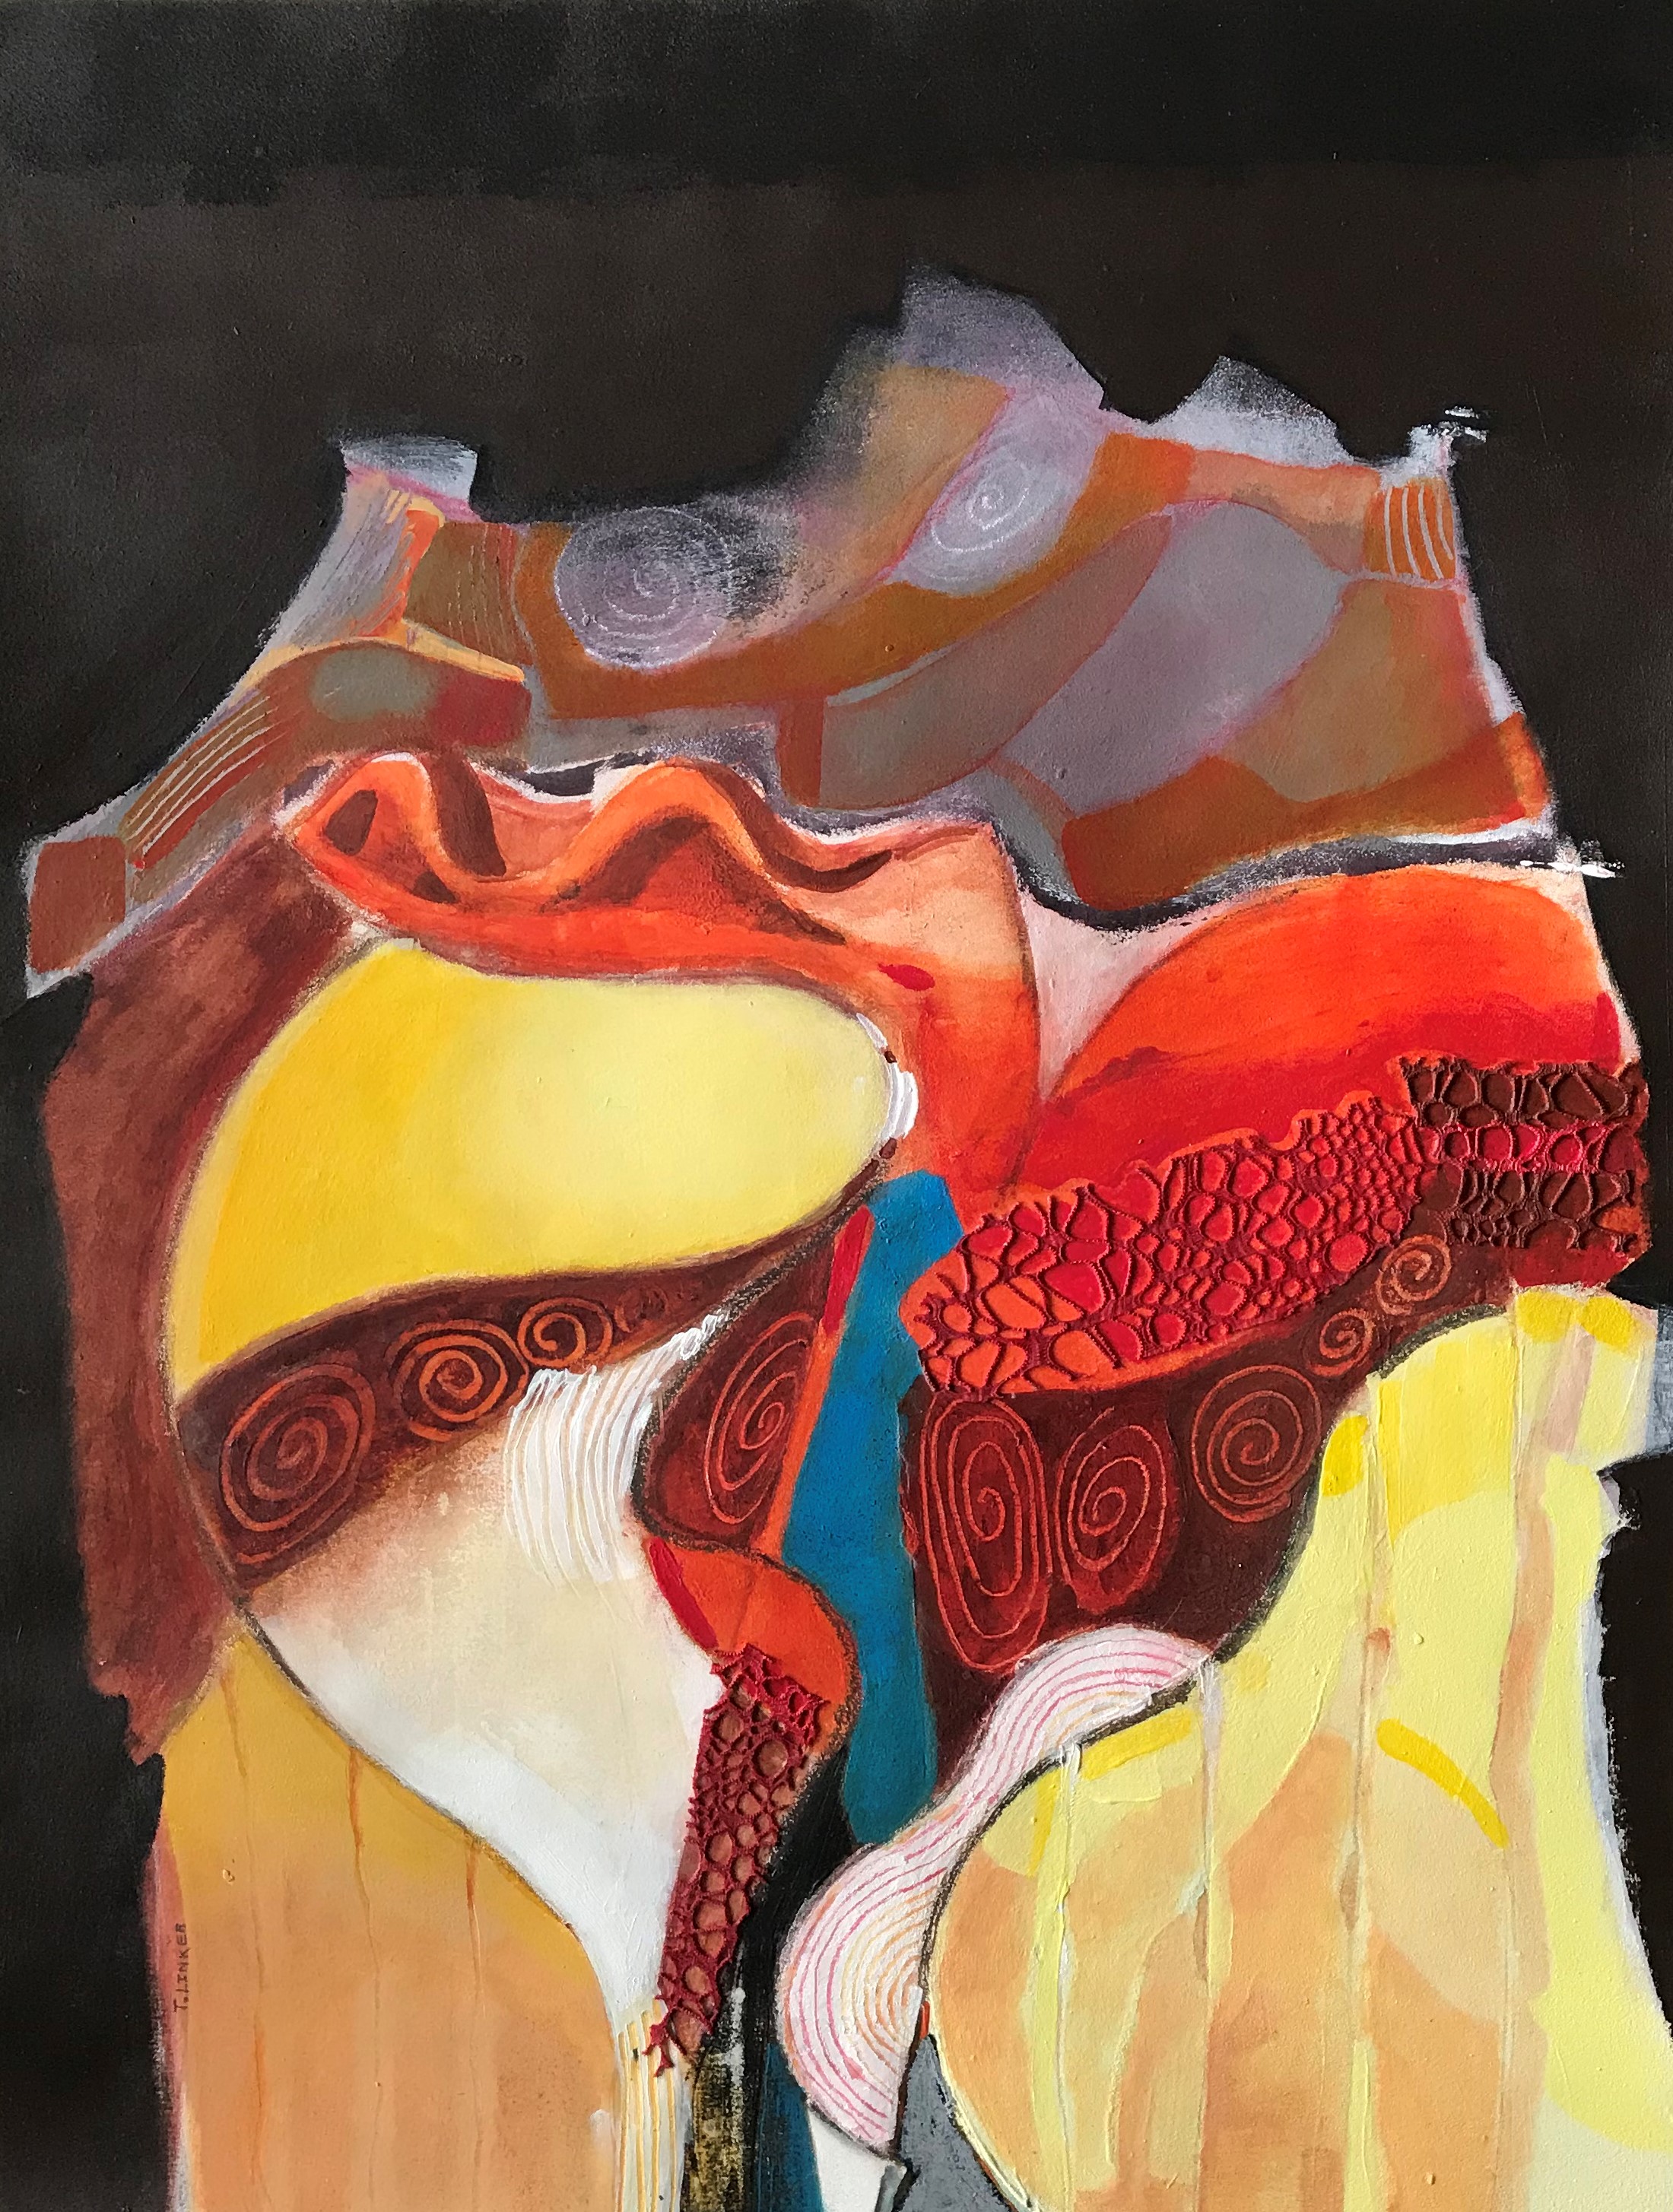  “Canyon With Blue Lake”  23” x 29”  Mixed media acrylic and fabric on paper framed 